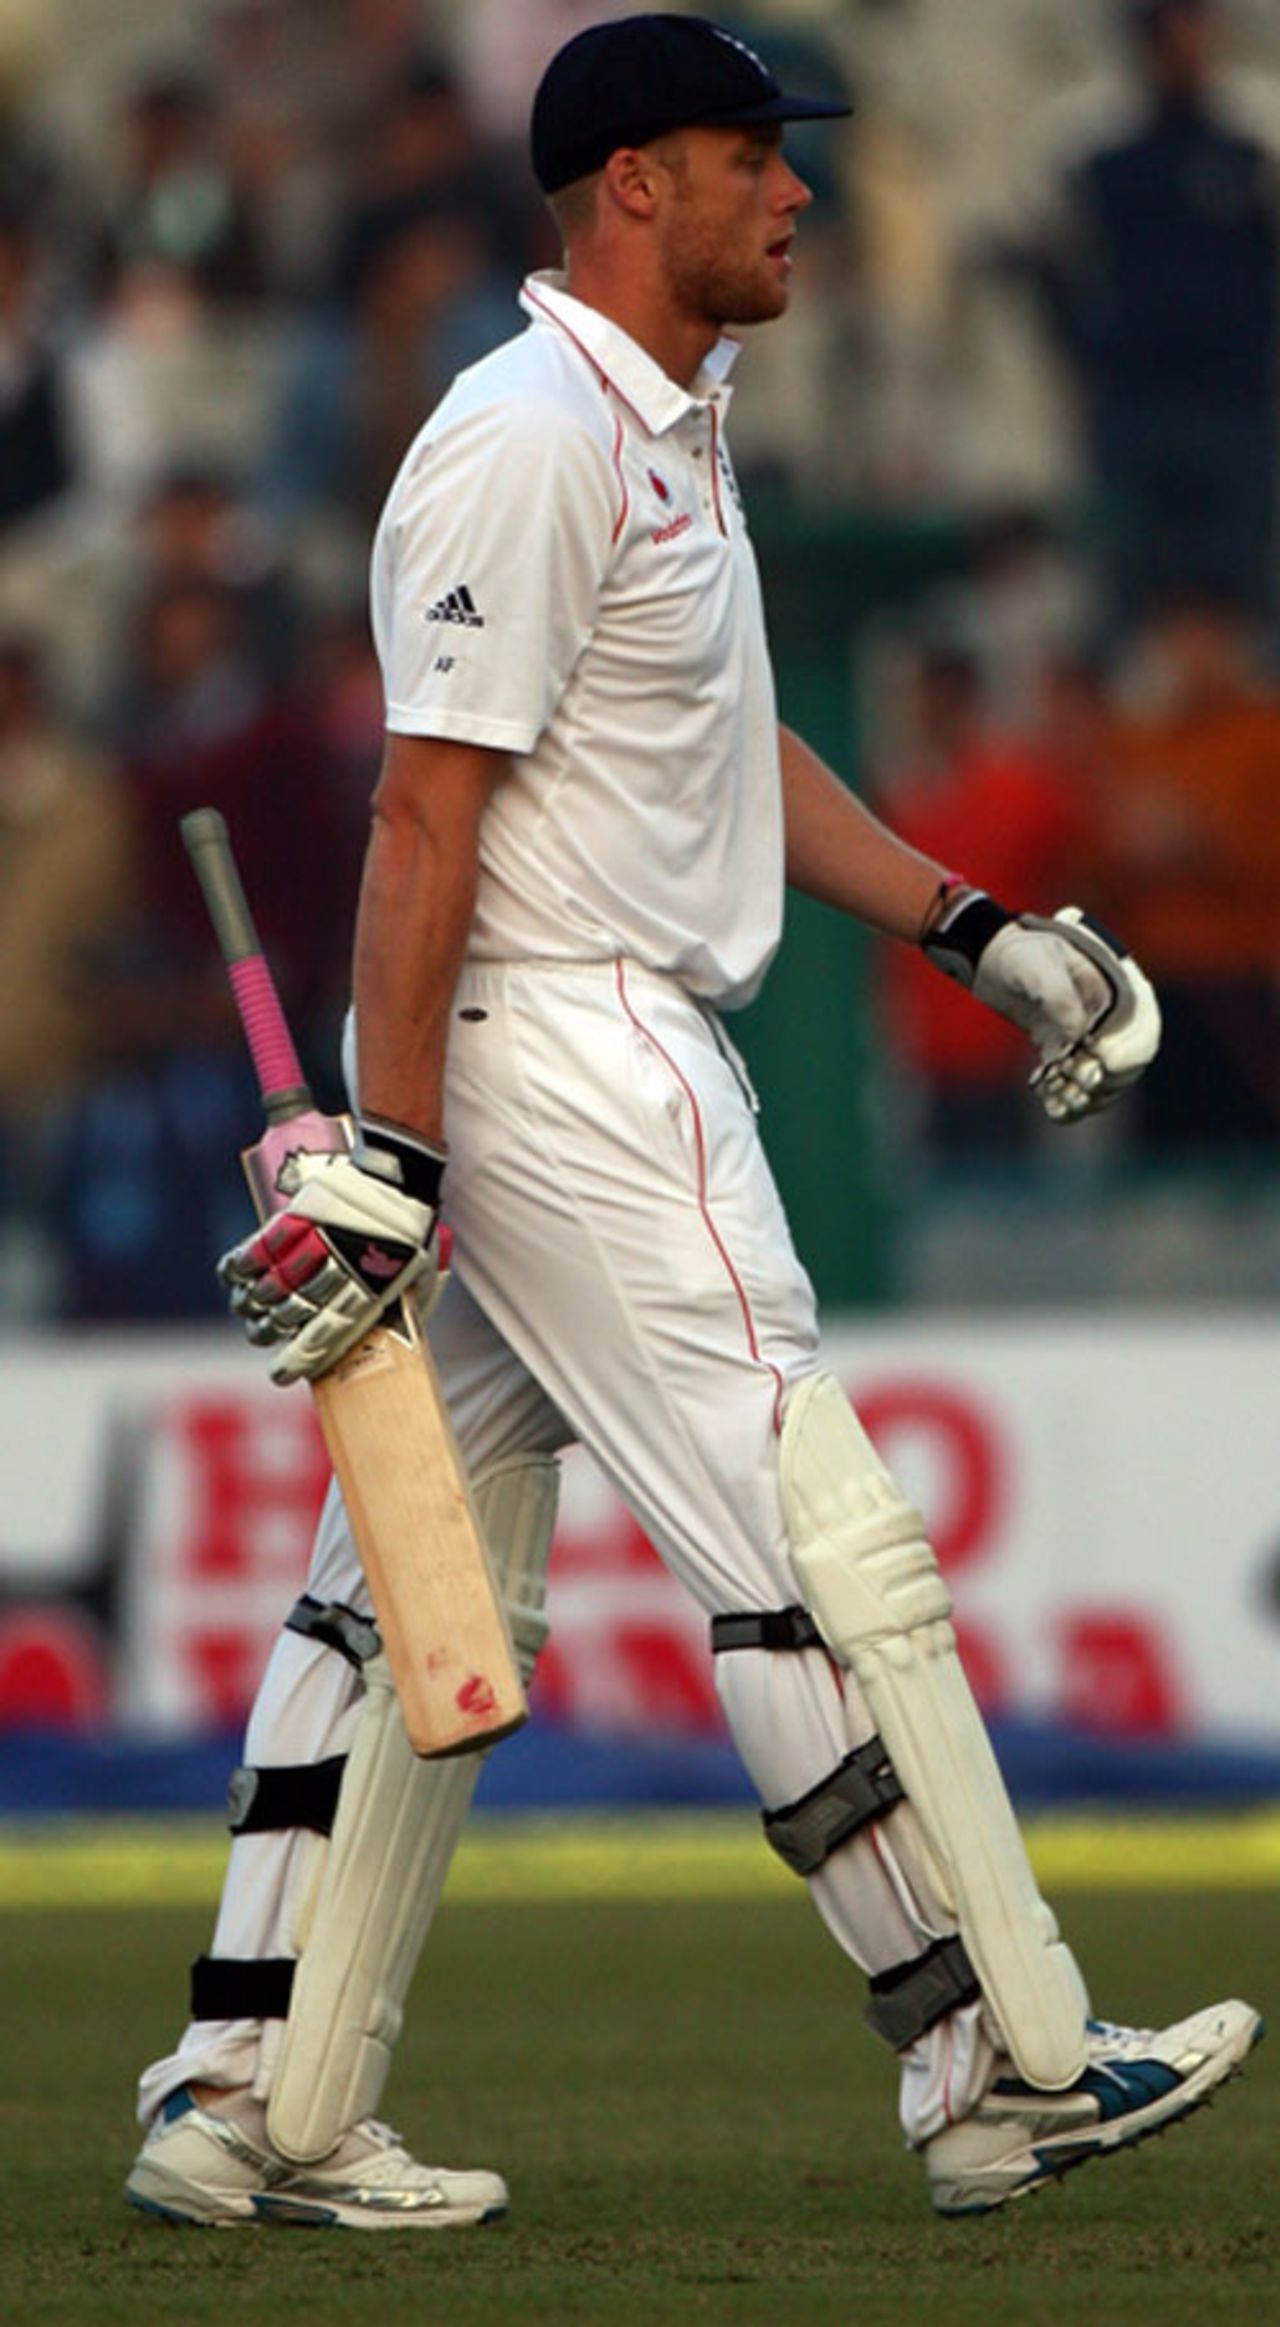 Andrew Flintoff walks back after being dismissed late in the day, India v England, 2nd Test, Mohali, 3rd day, December 21, 2008